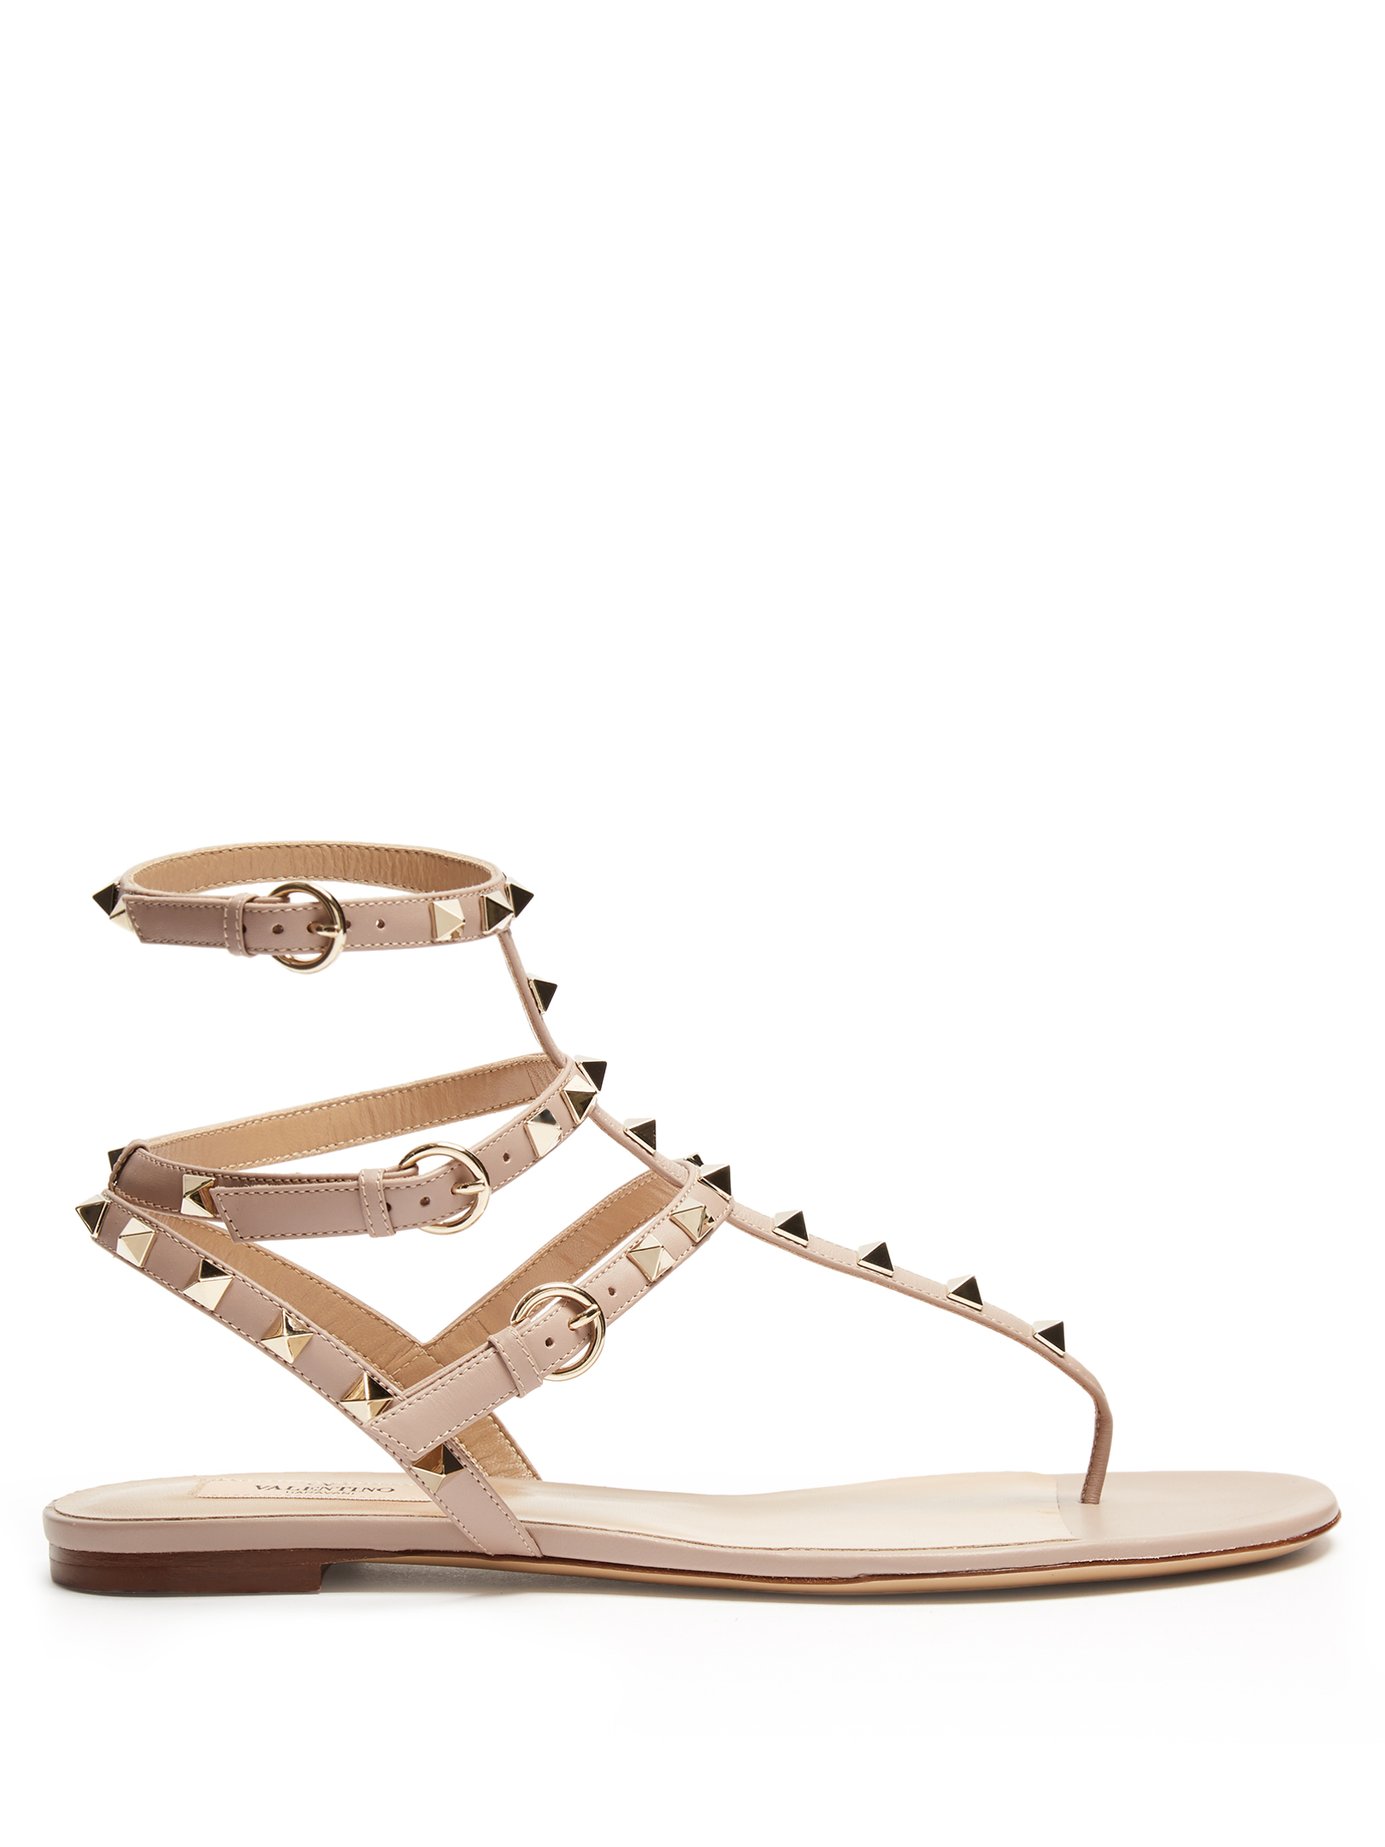 Rockstud T-bar leather flat sandals by Valentino shoes online shopping ...